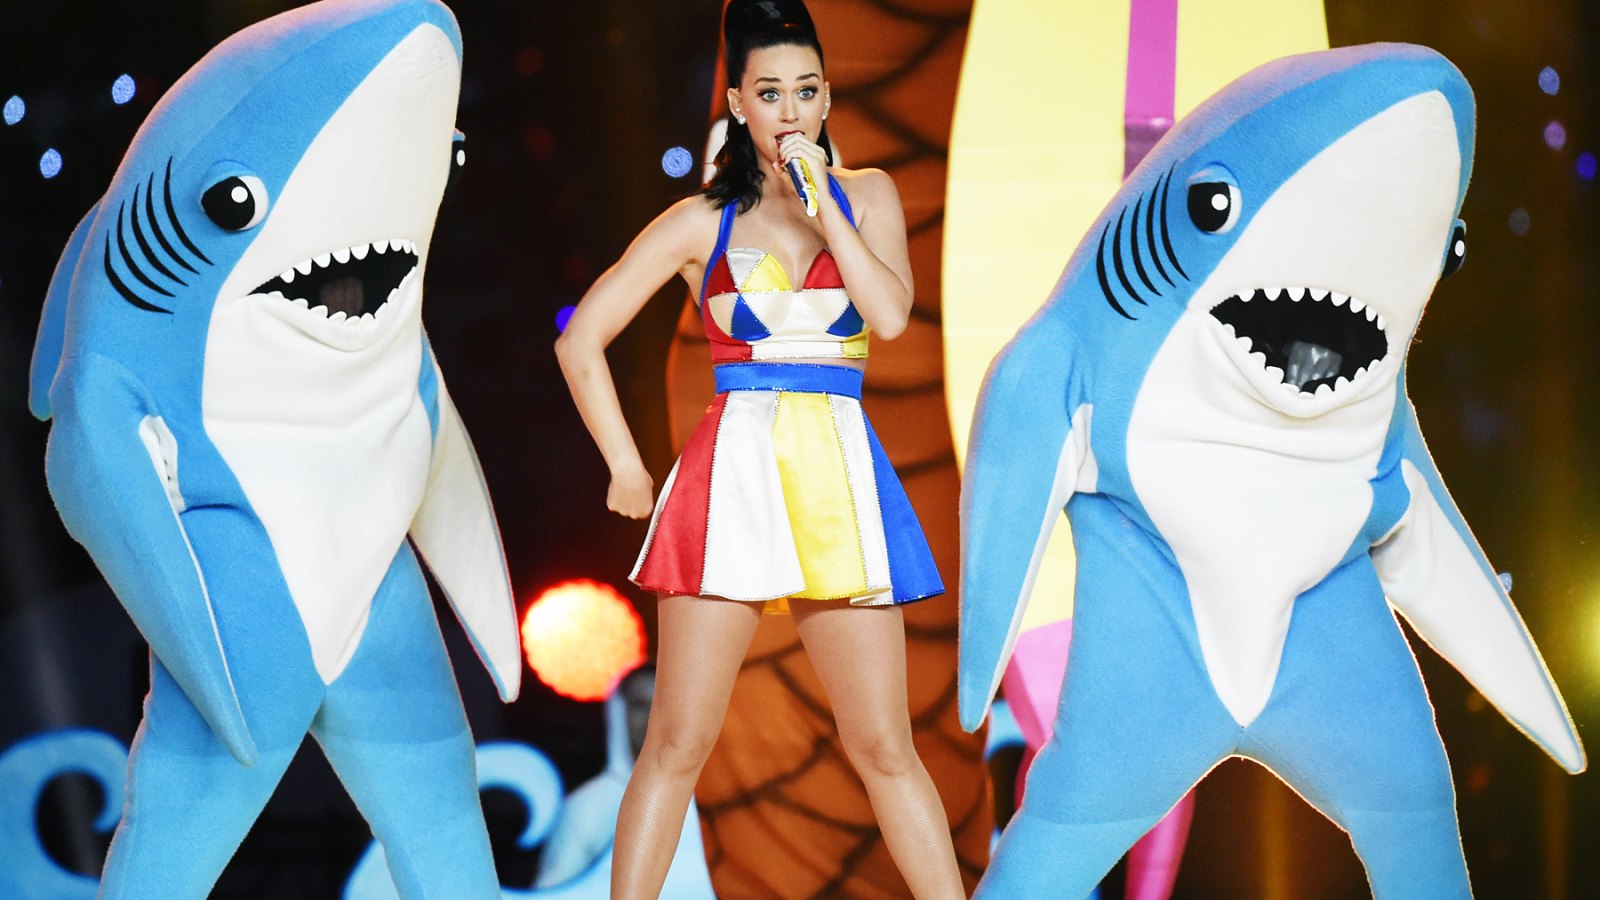 Katy Perry and her dancing sharks perform at Super Bowl XLIX halftime